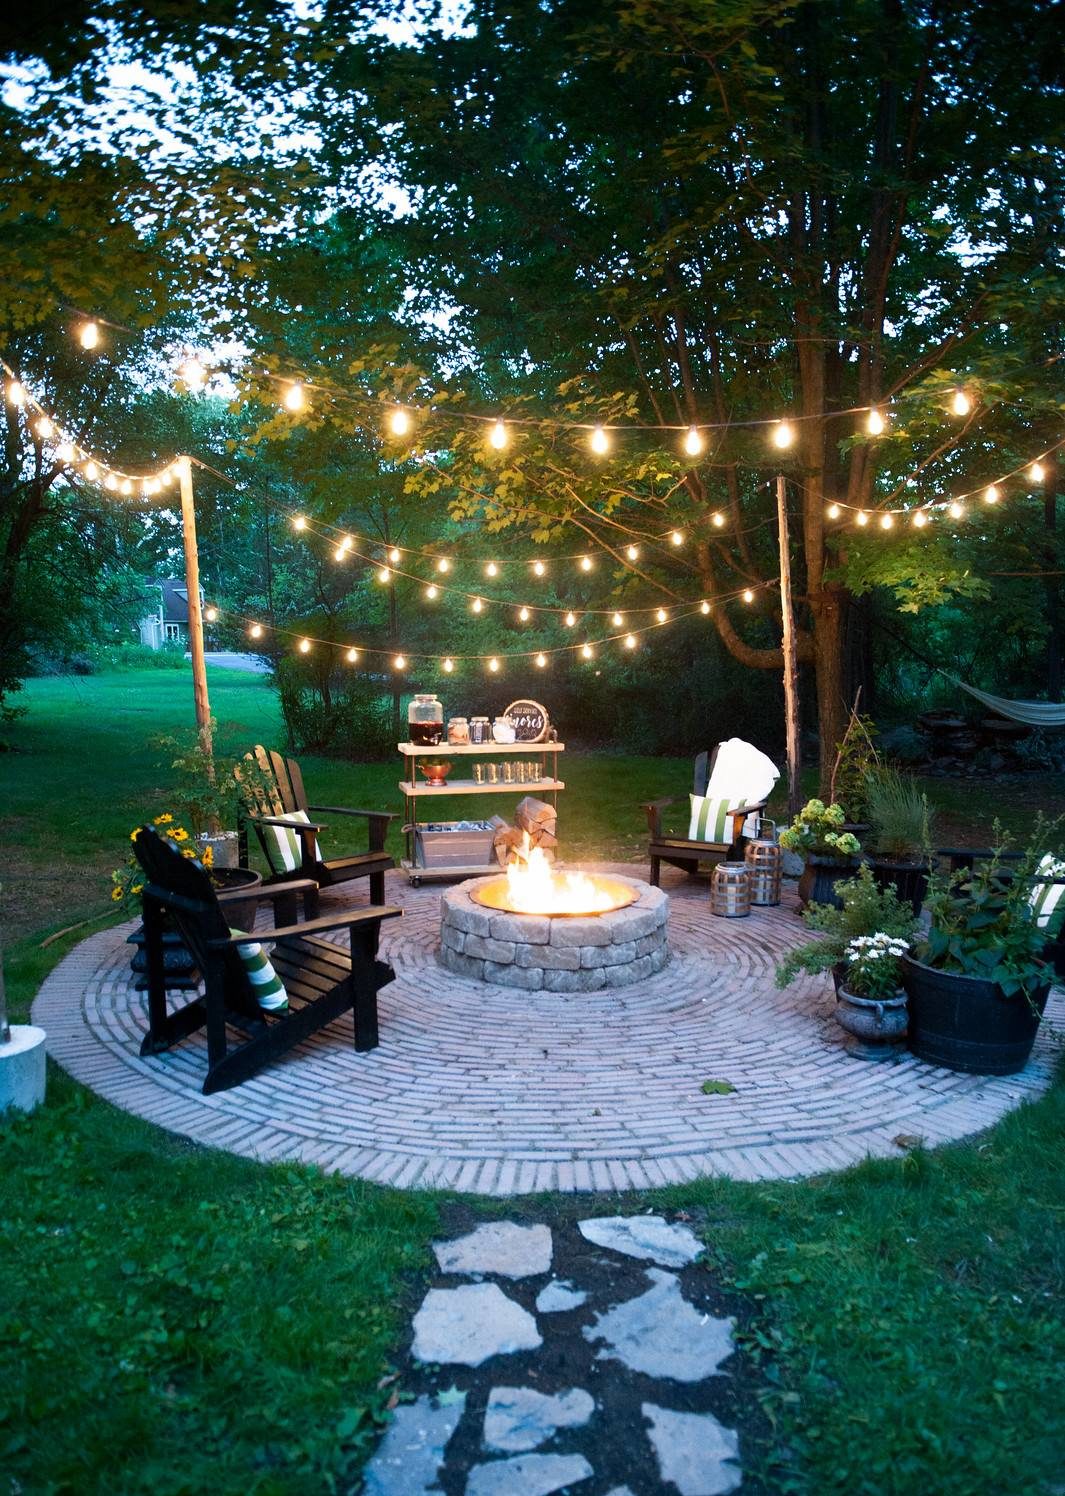 Unique Fire Pit Area Ideas For, How To Make A Small Outdoor Fire Pit